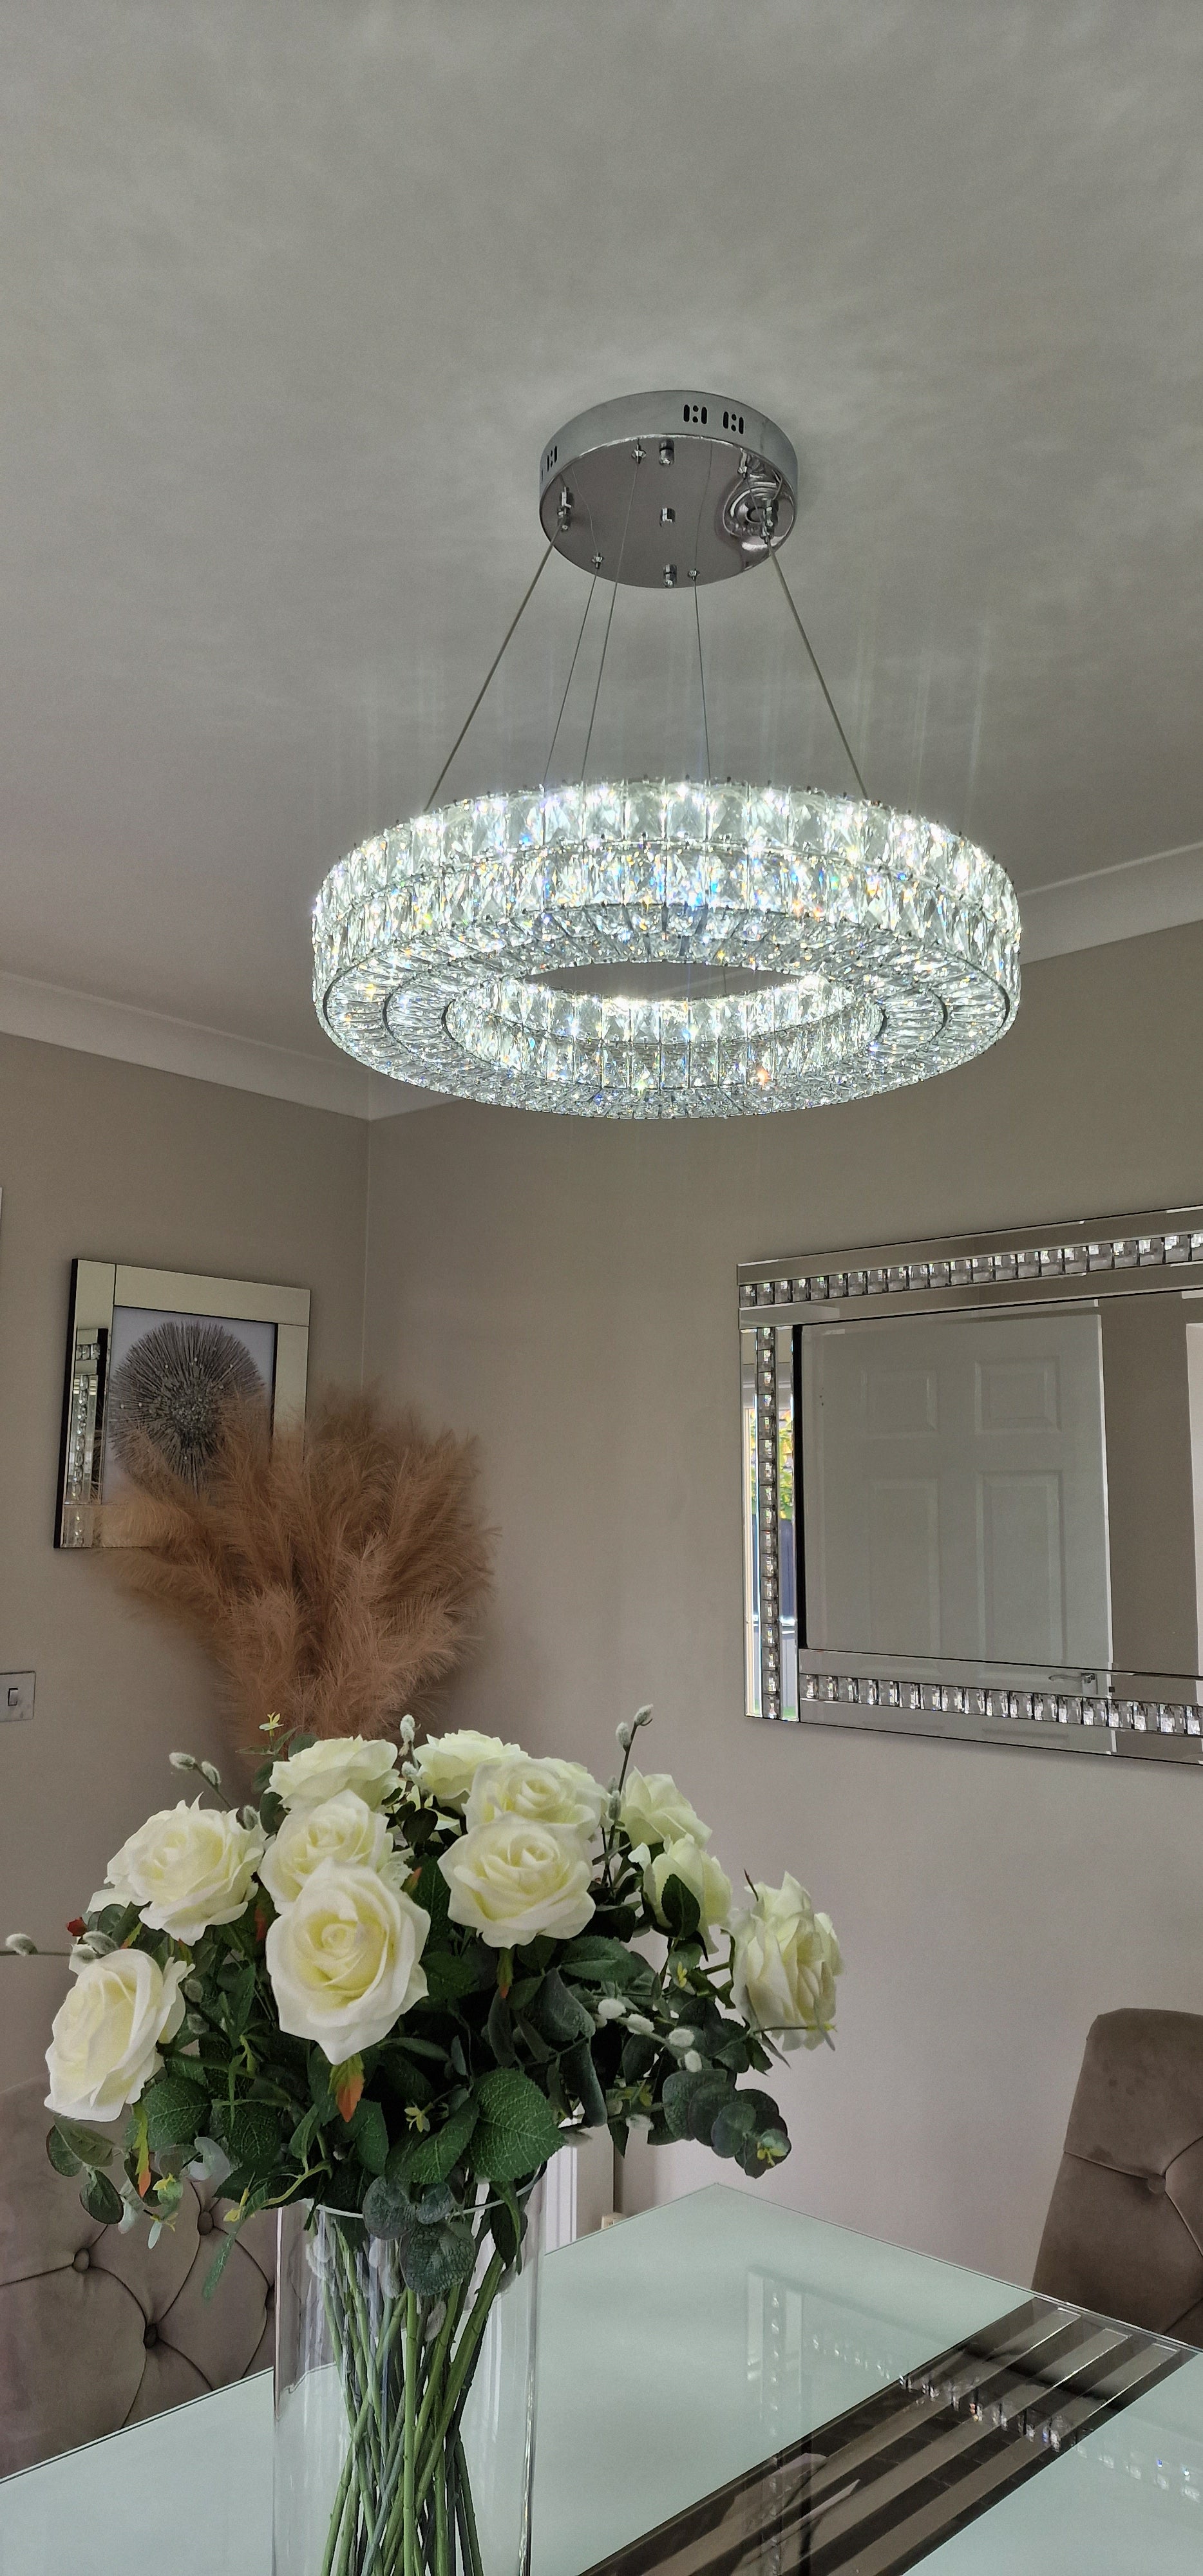 Crystal LED Wheel Pendant Ceiling Light-Colour Changing Dimmable with Remote Control-202134-650-72*72*20cm-50W-Chrome